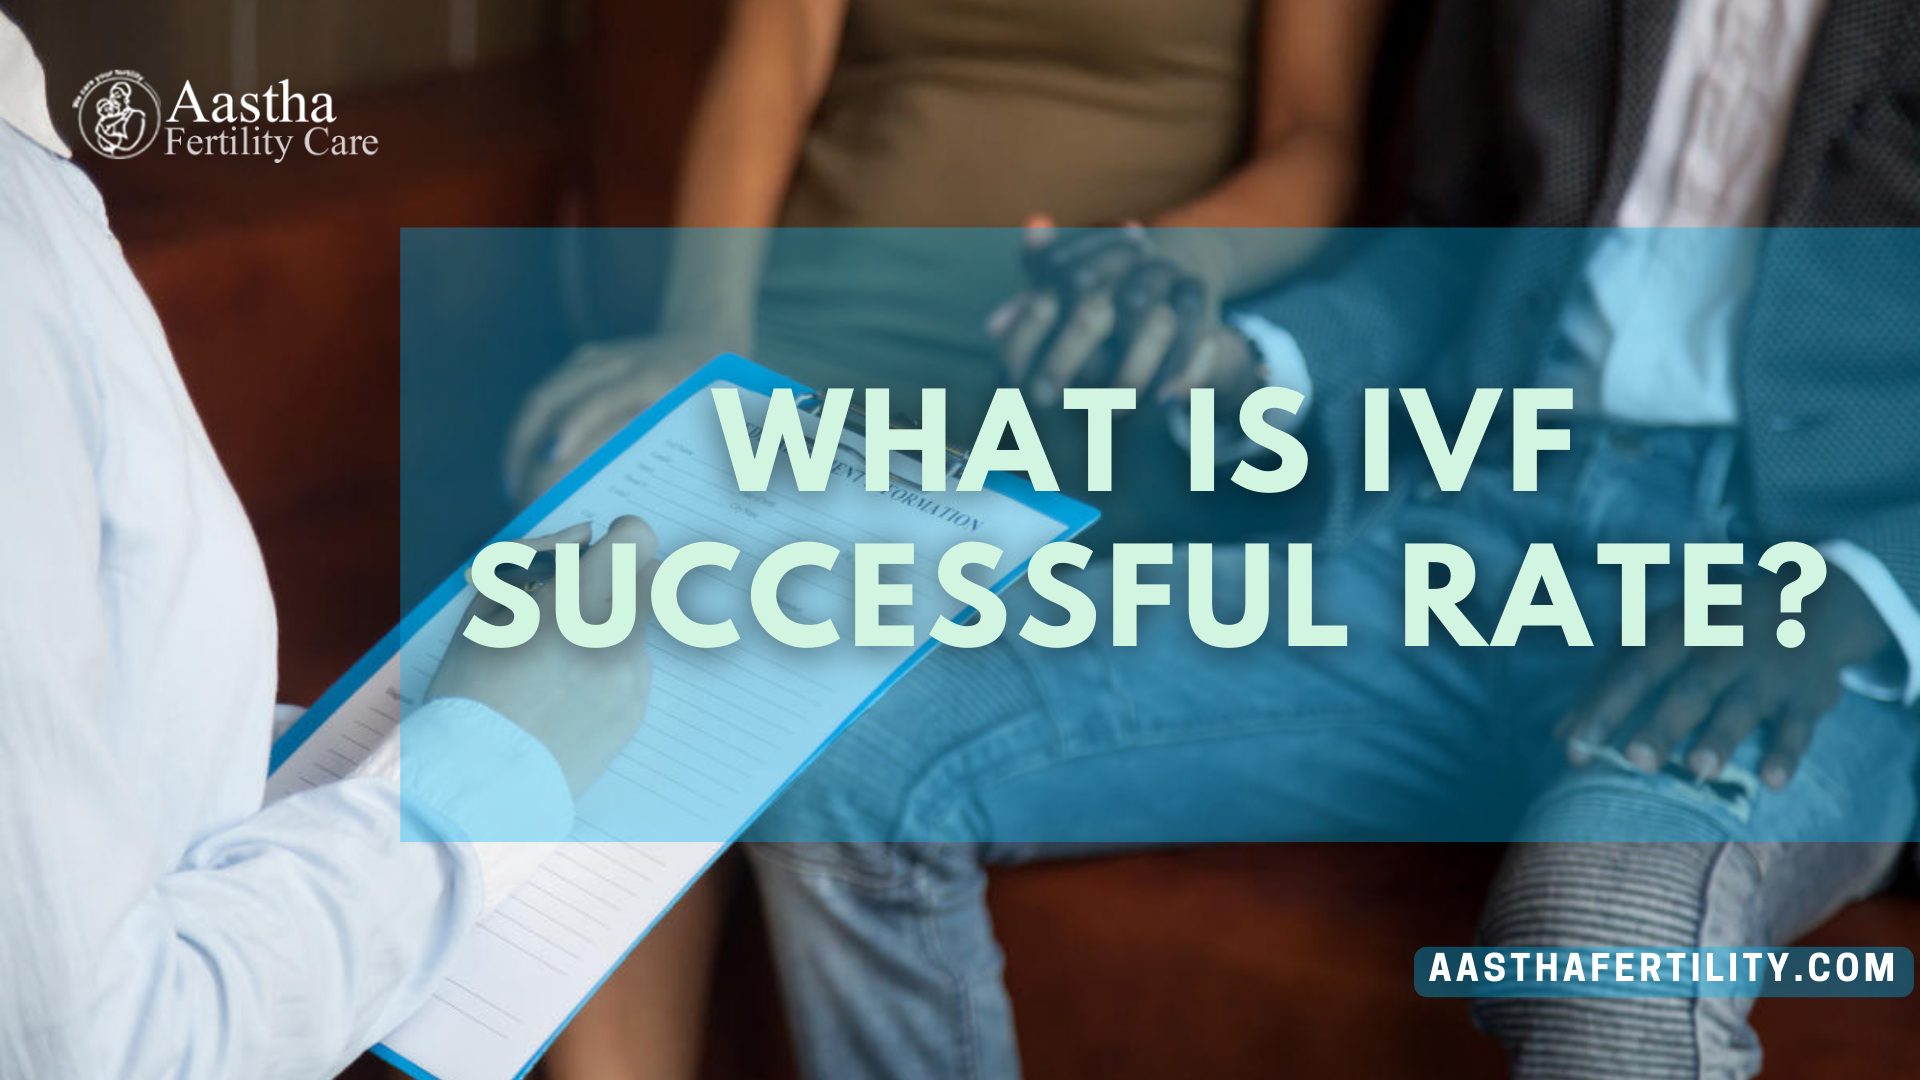 What Is IVF Successful Rate?